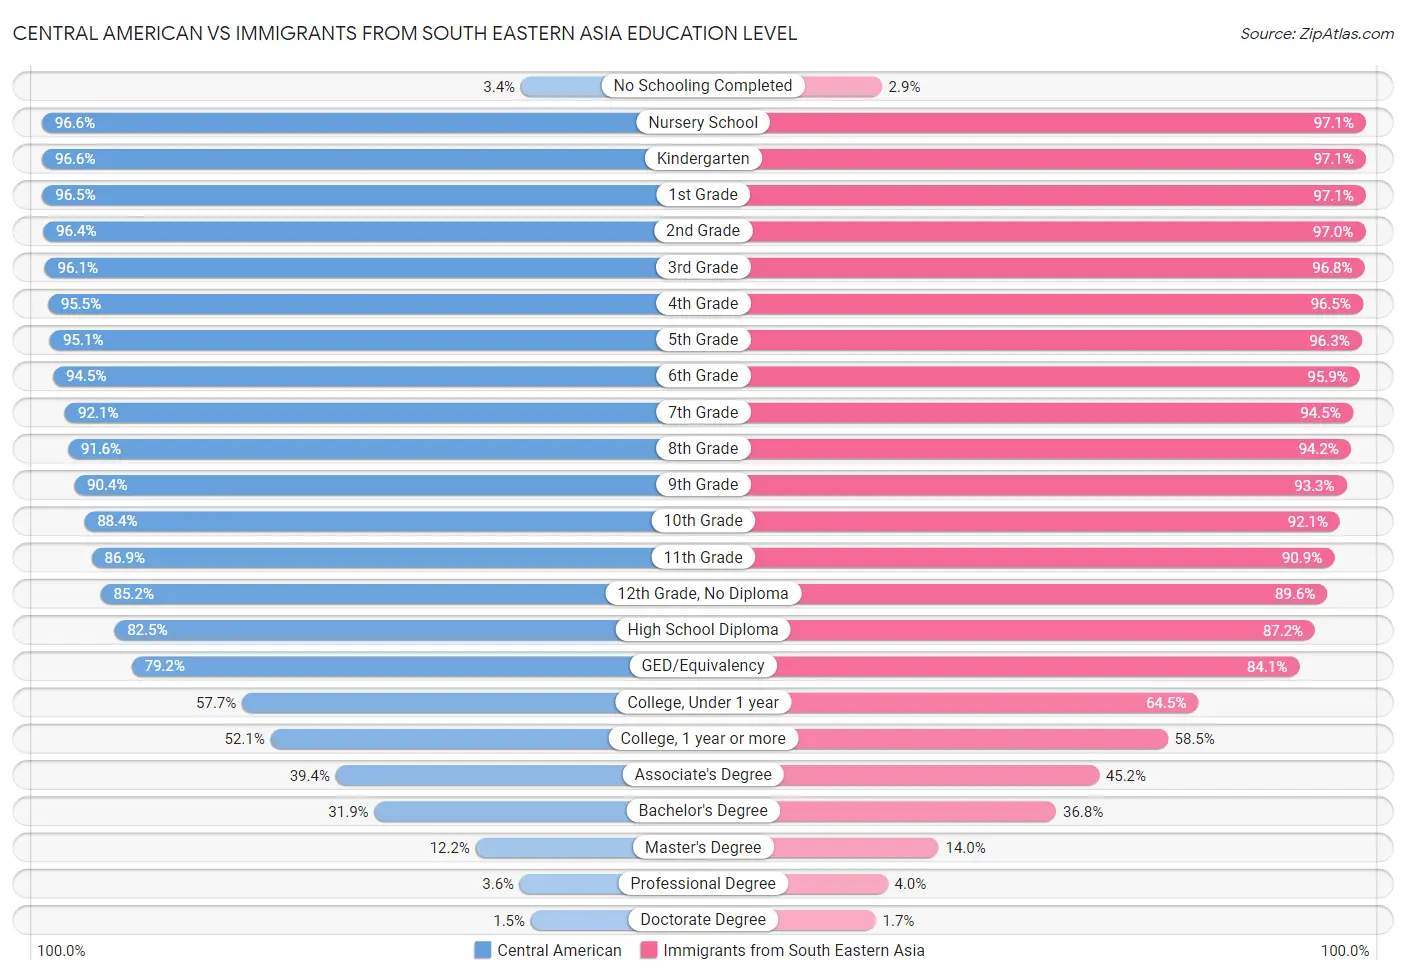 Central American vs Immigrants from South Eastern Asia Education Level